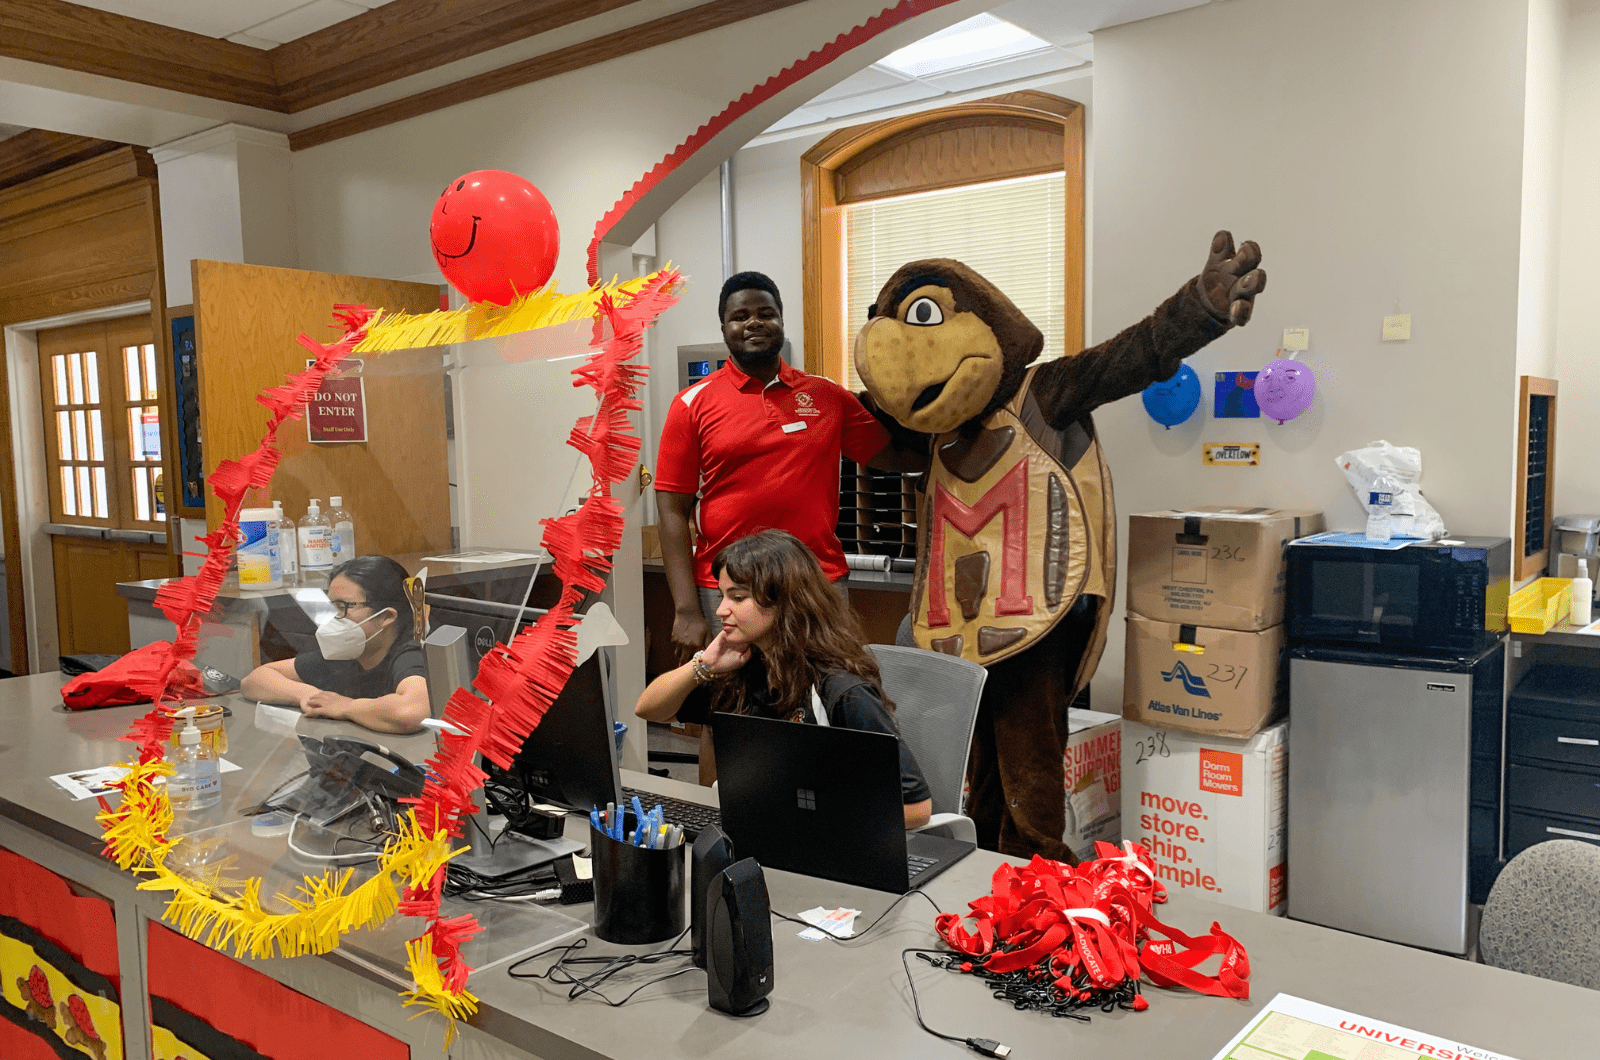 testudo mascot posing with student staff behind service desk